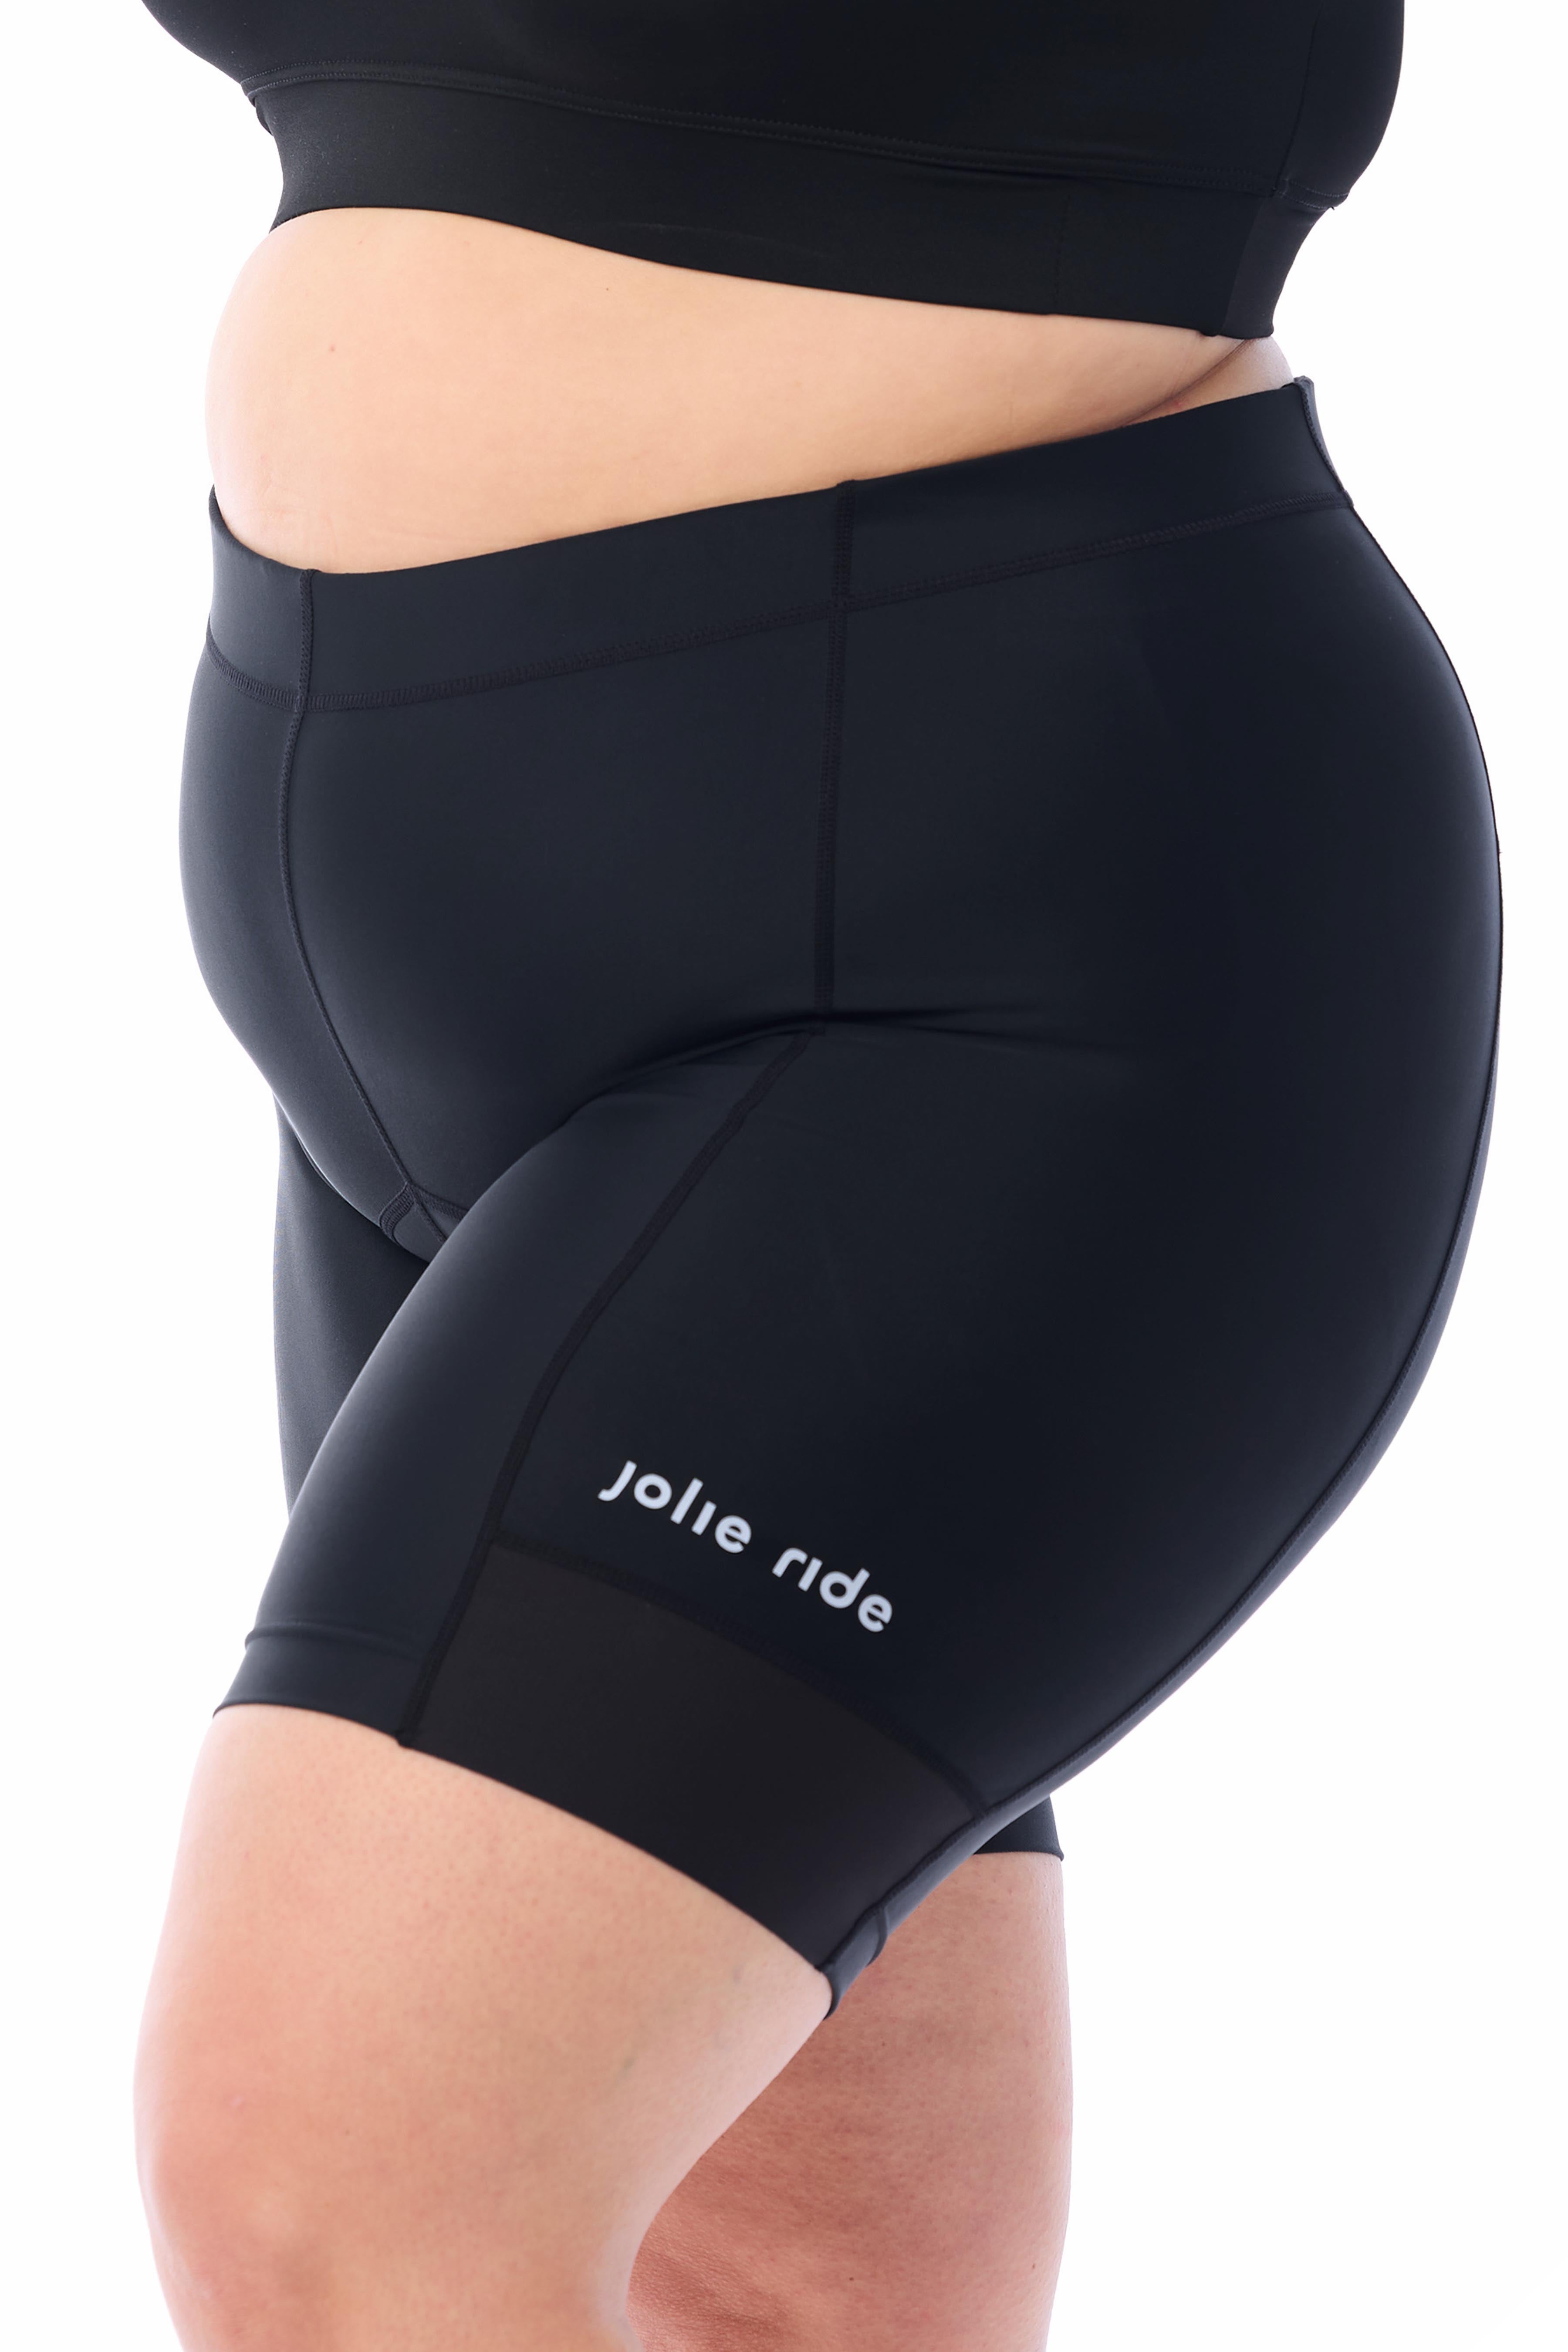 women's cycling shorts with 20cm inseam with anti-shock padding